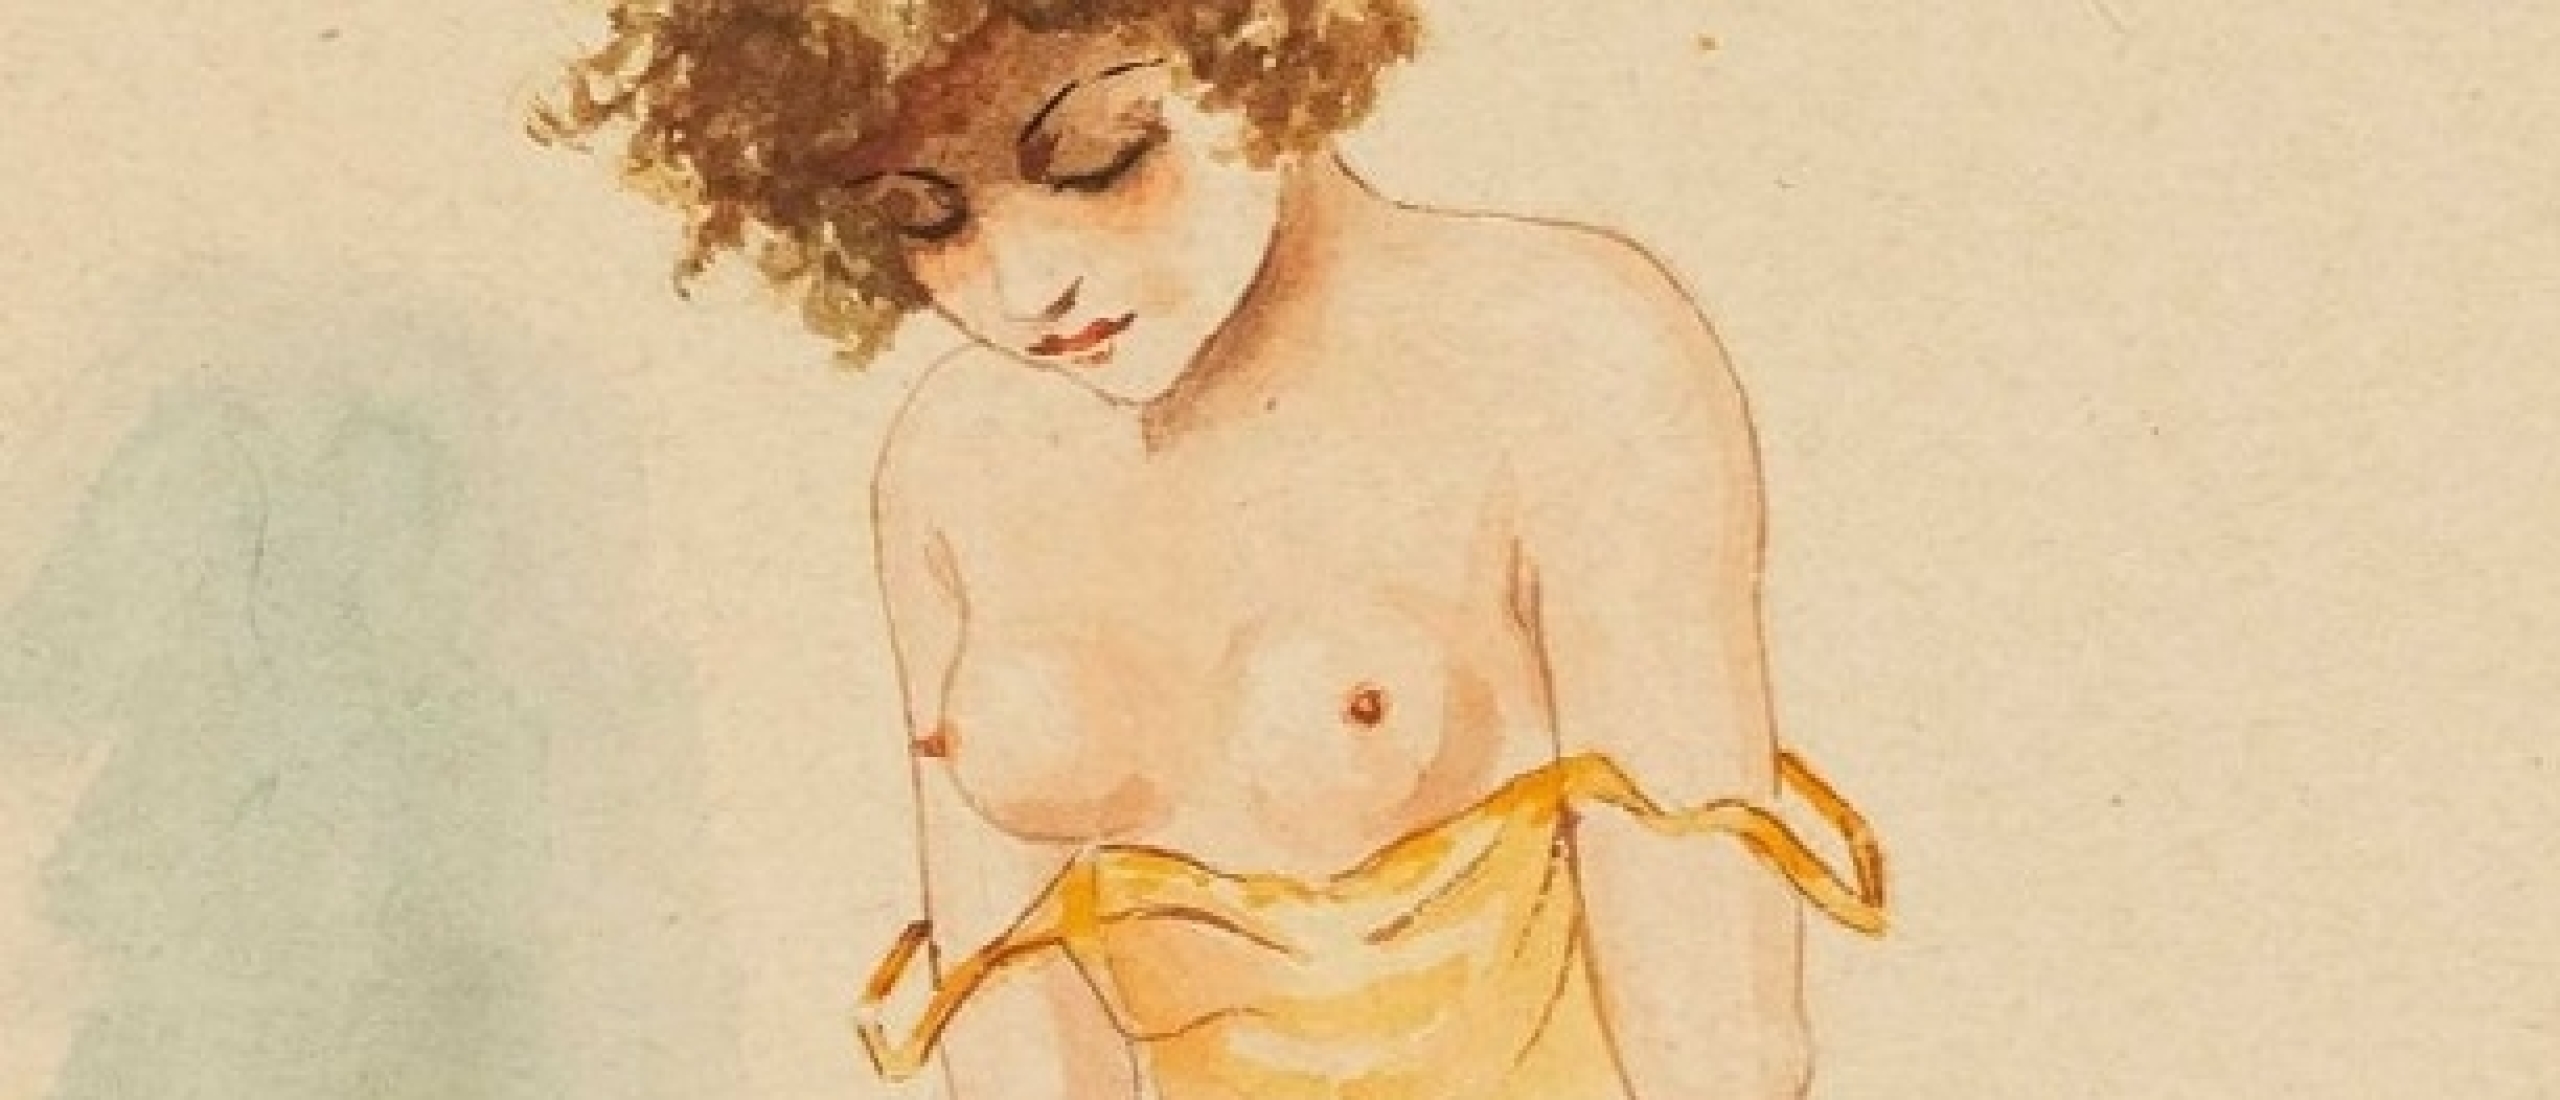 Rare BDSM Secrets of the Mysterious French Illustrator Lusché